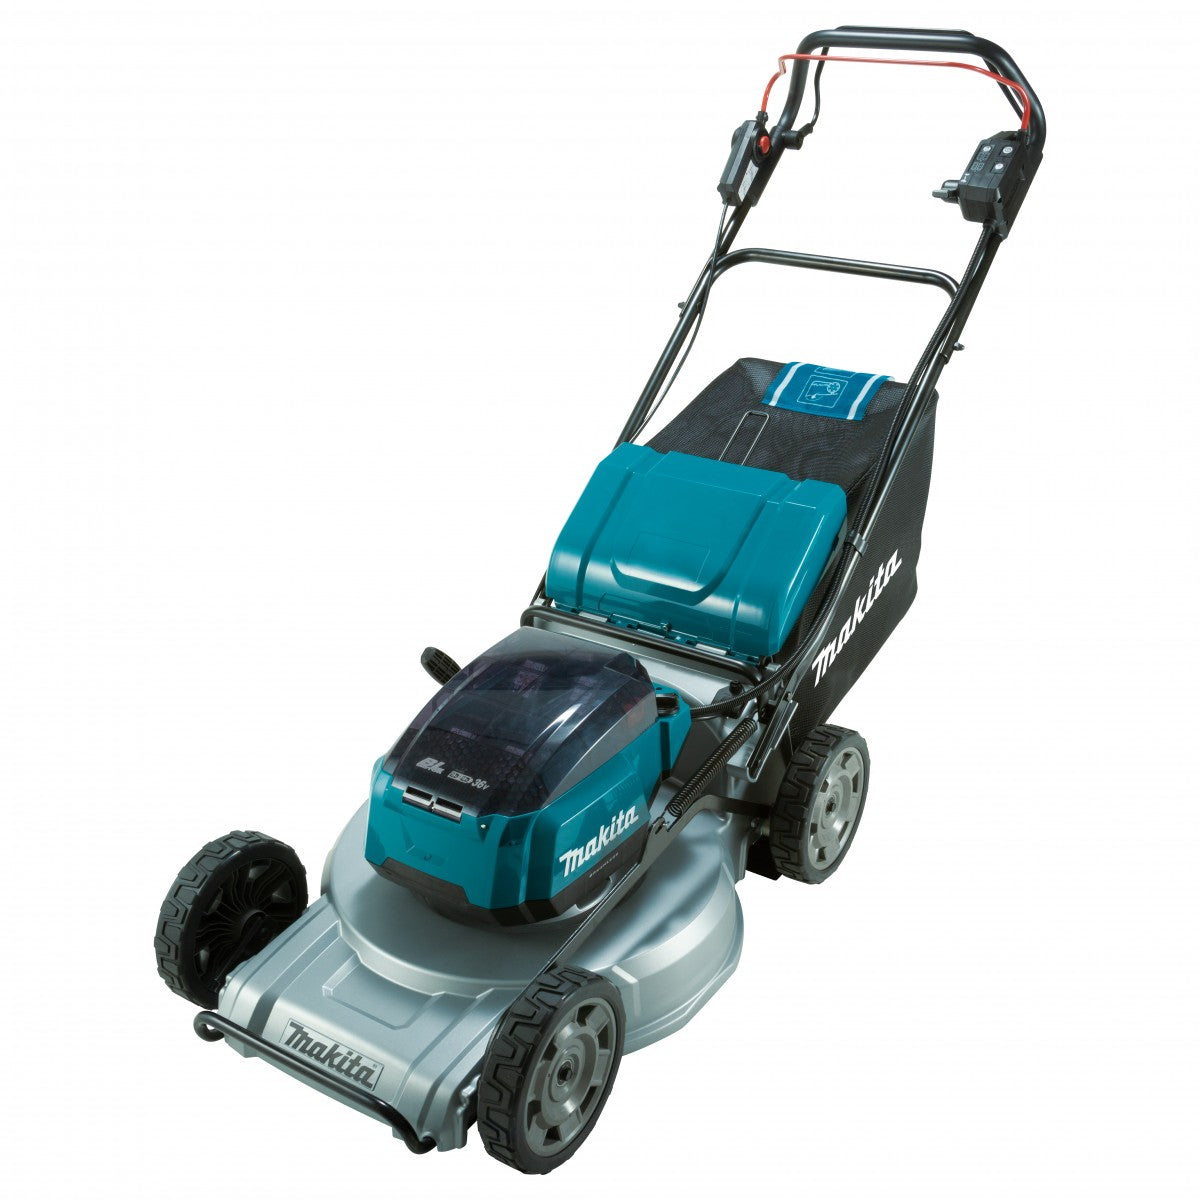 18Vx2 534mm (21") Brushless Self-Propelled Lawn Mower - Aluminium Deck Bare (Tool Only) DLM537ZX by Makita